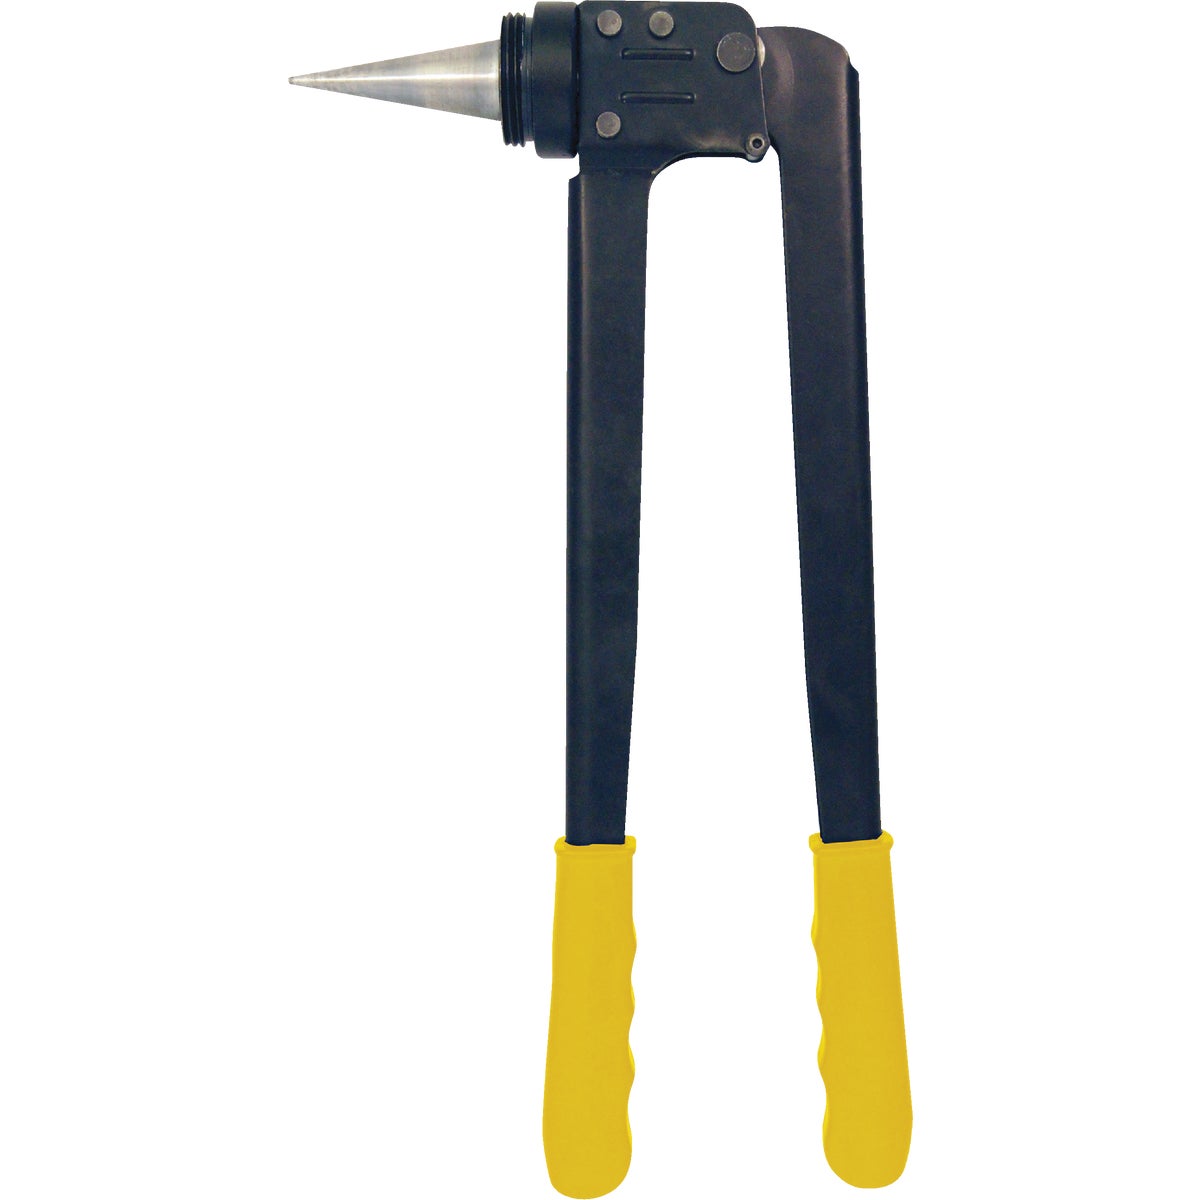 Item 405455, Apollo ExpansionPEX tool is used in conjunction with 1/2 In, 3/4 In.